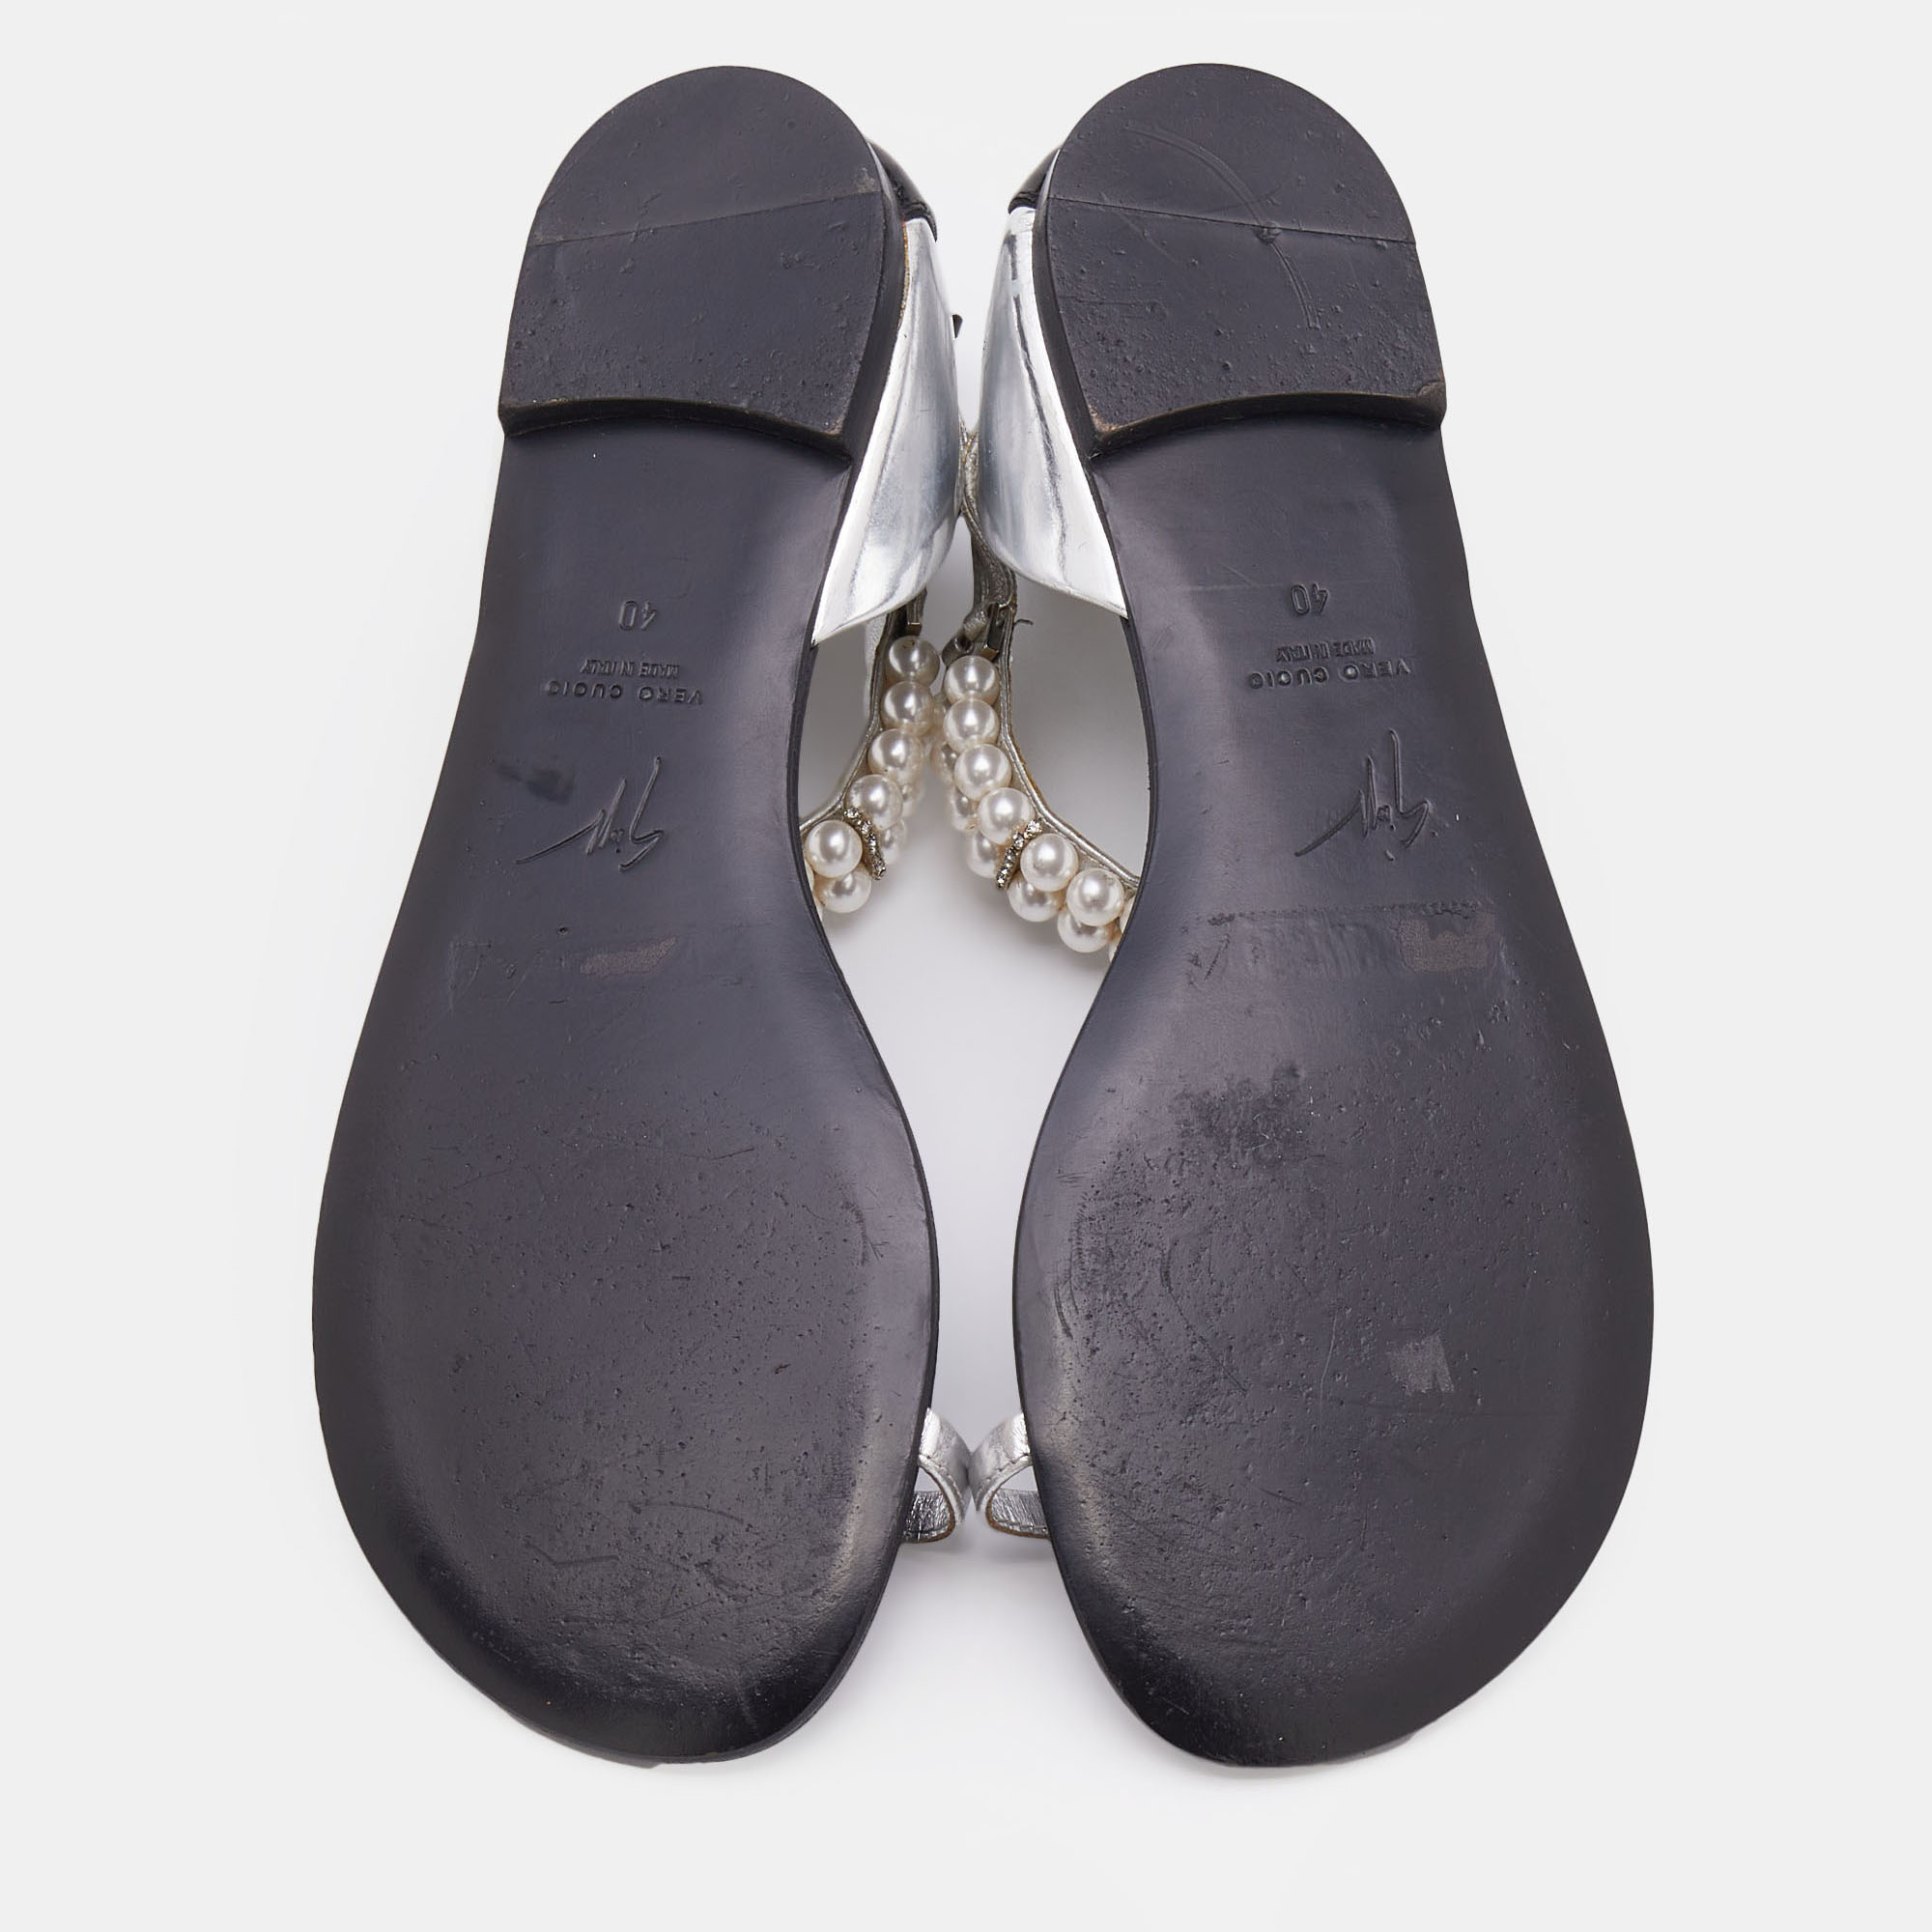 Giuseppe Zanotti Black/Silver Patent And Leather Pearl Embellished Toe Ring Flat Sandals Size 40